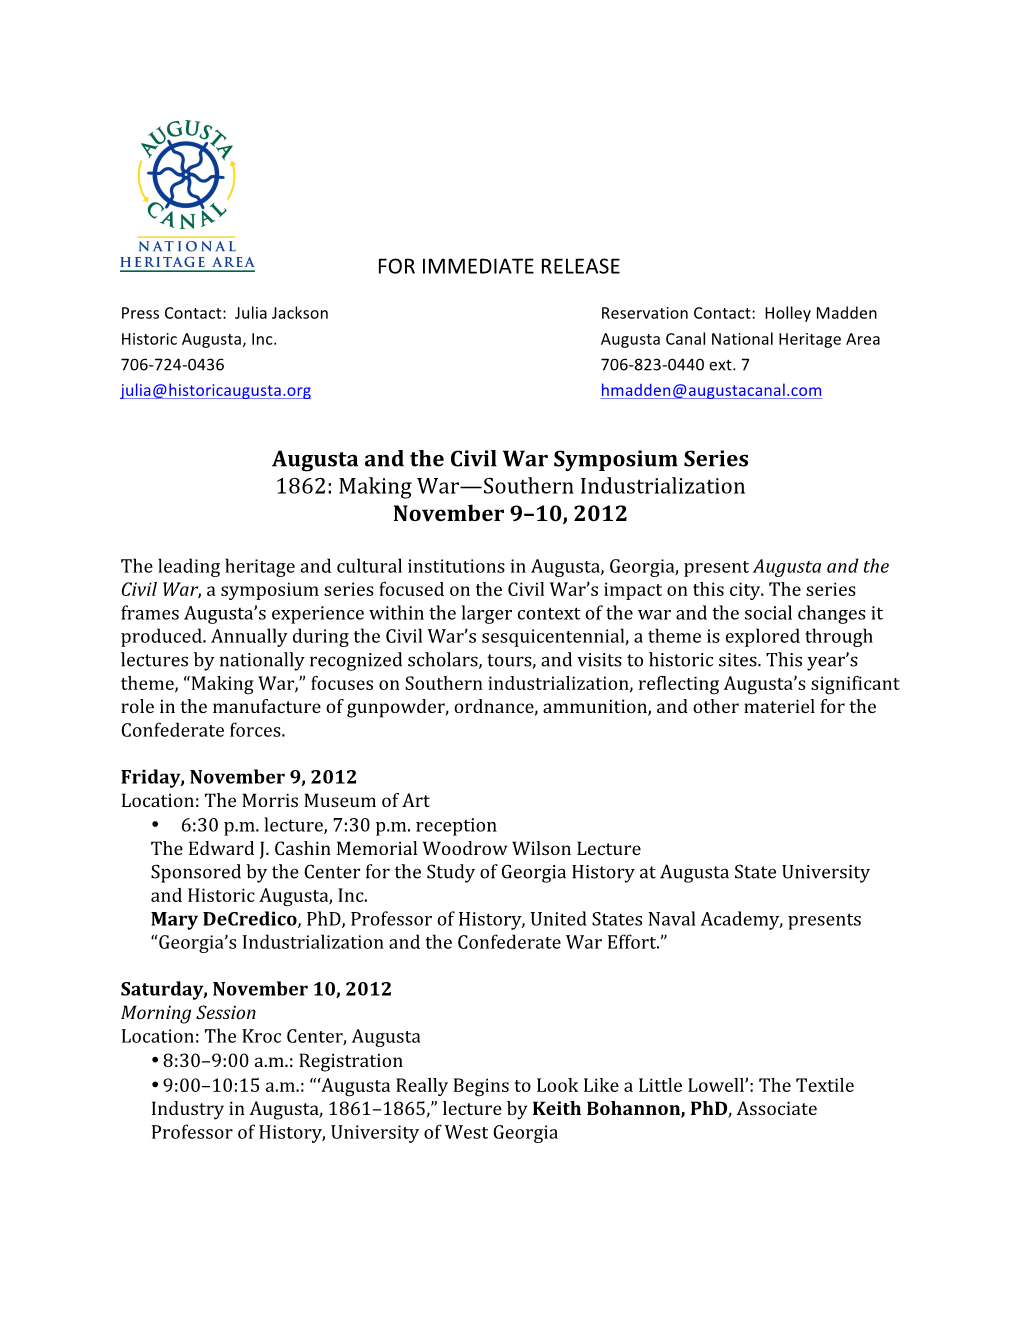 FOR IMMEDIATE RELEASE Augusta and the Civil War Symposium Series 1862